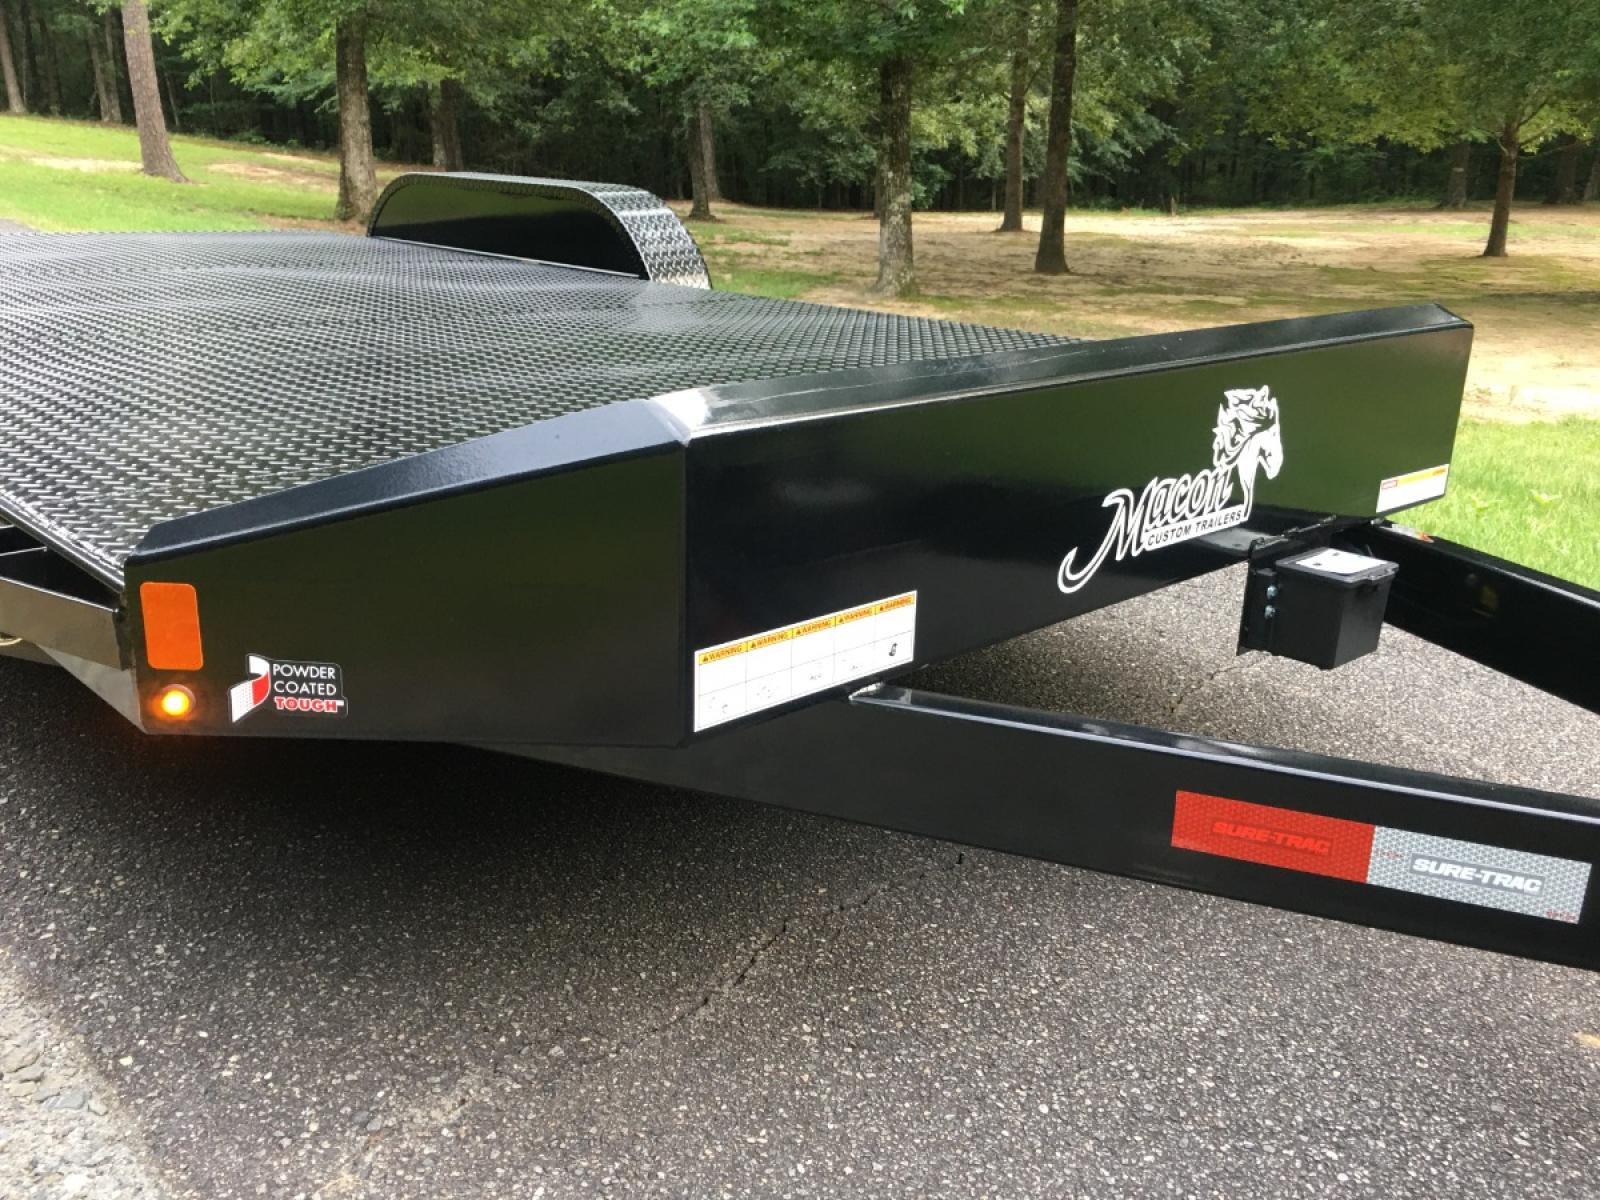 2022 Black Sure-Trac 7ft X 18ft Tandem , located at 1330 Rainey Rd., Macon, 31220, (478) 960-1044, 32.845638, -83.778687 - New Deluxe Sure Trac Brand 7ft X 18ft All Steel Car Hauler Trailer. 7ft Wide and 18ft Long, Including the 48